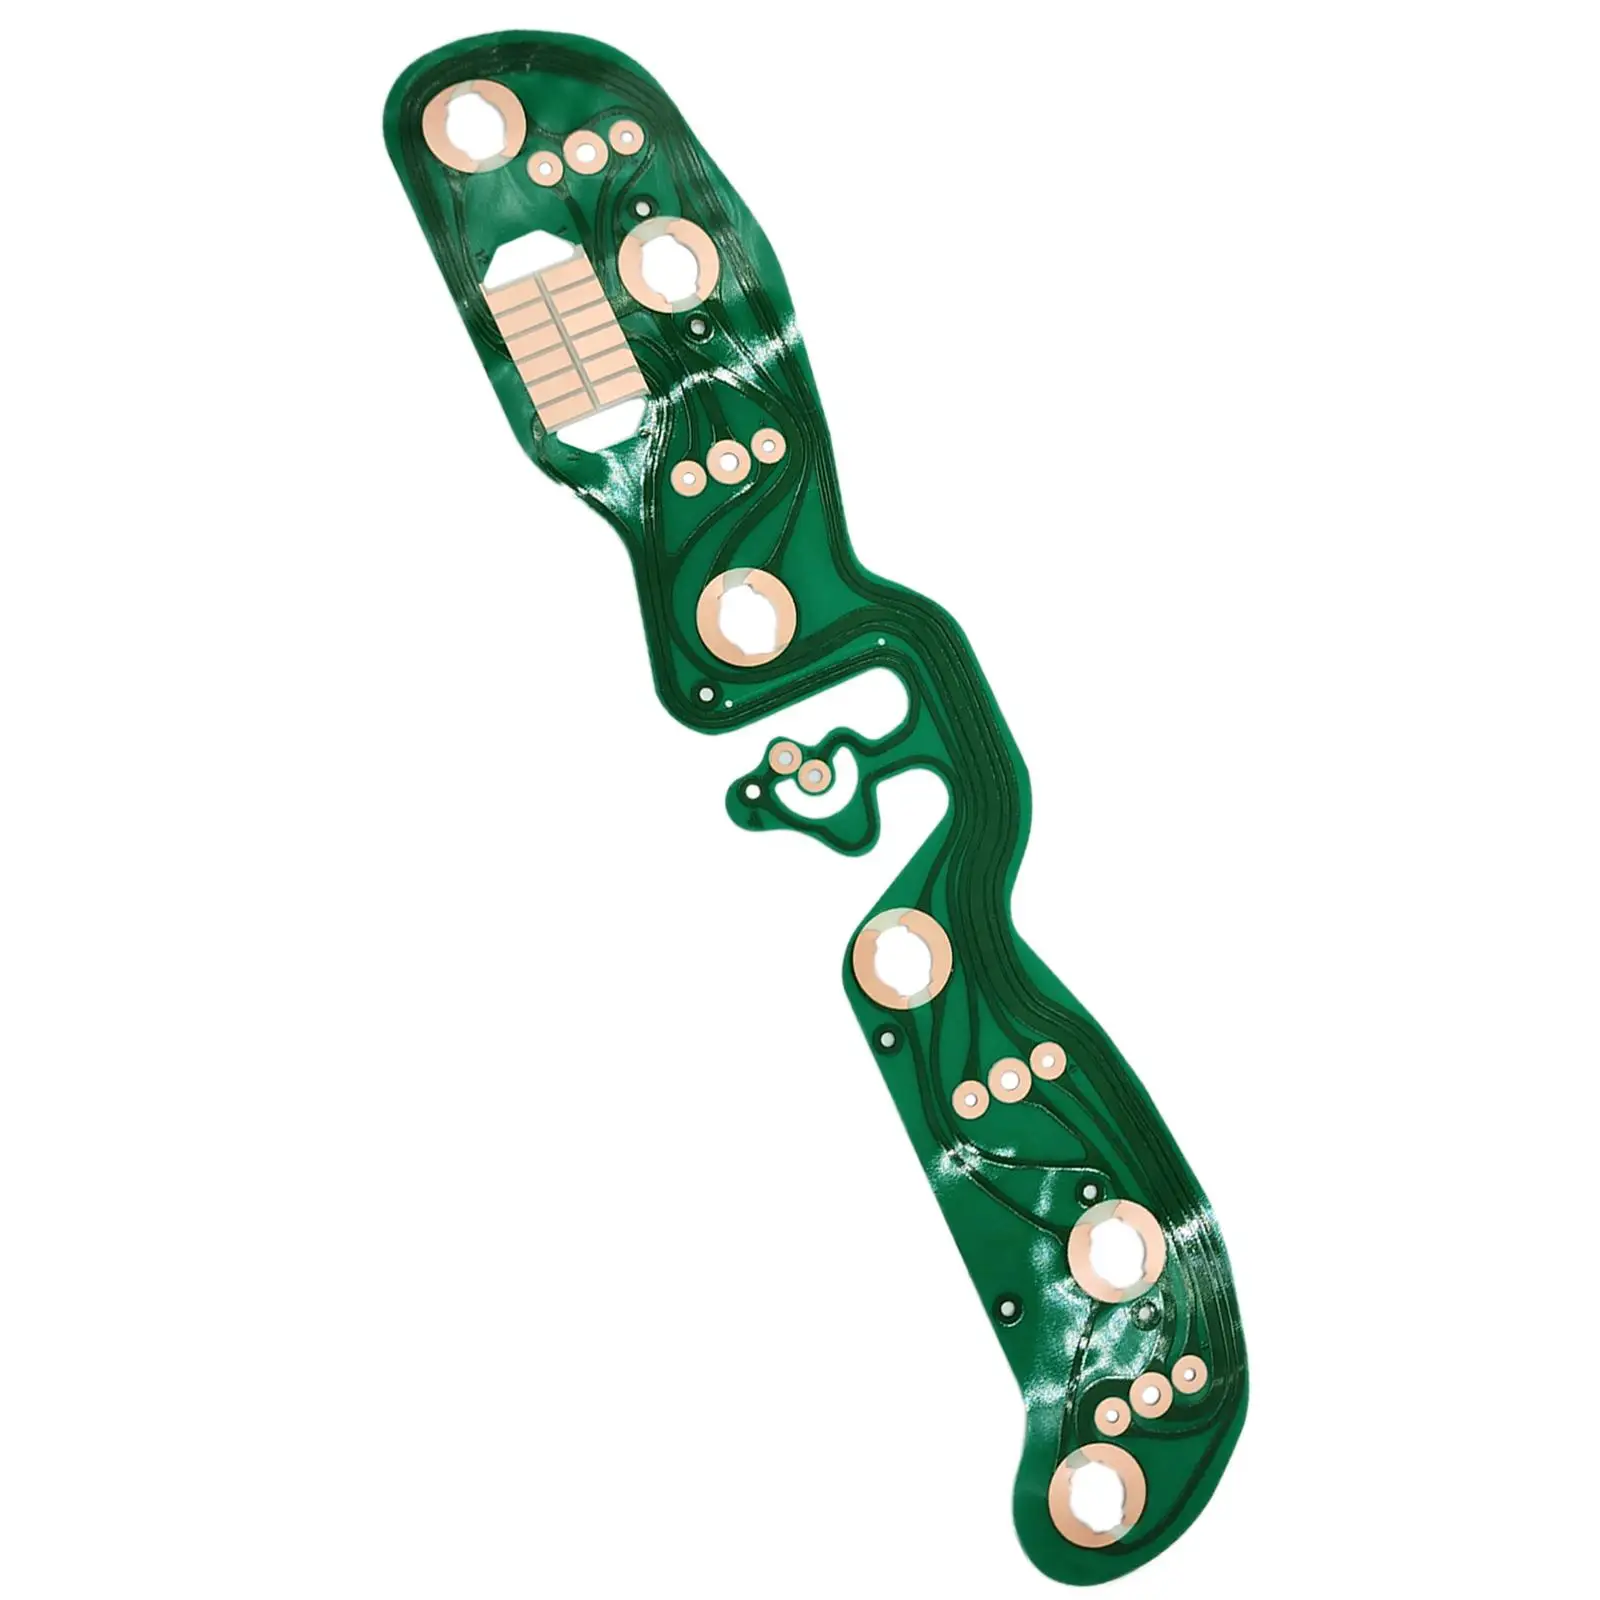 Gauges Printed Circuit Board for Jeep Wrangler Easy to Install Replaces